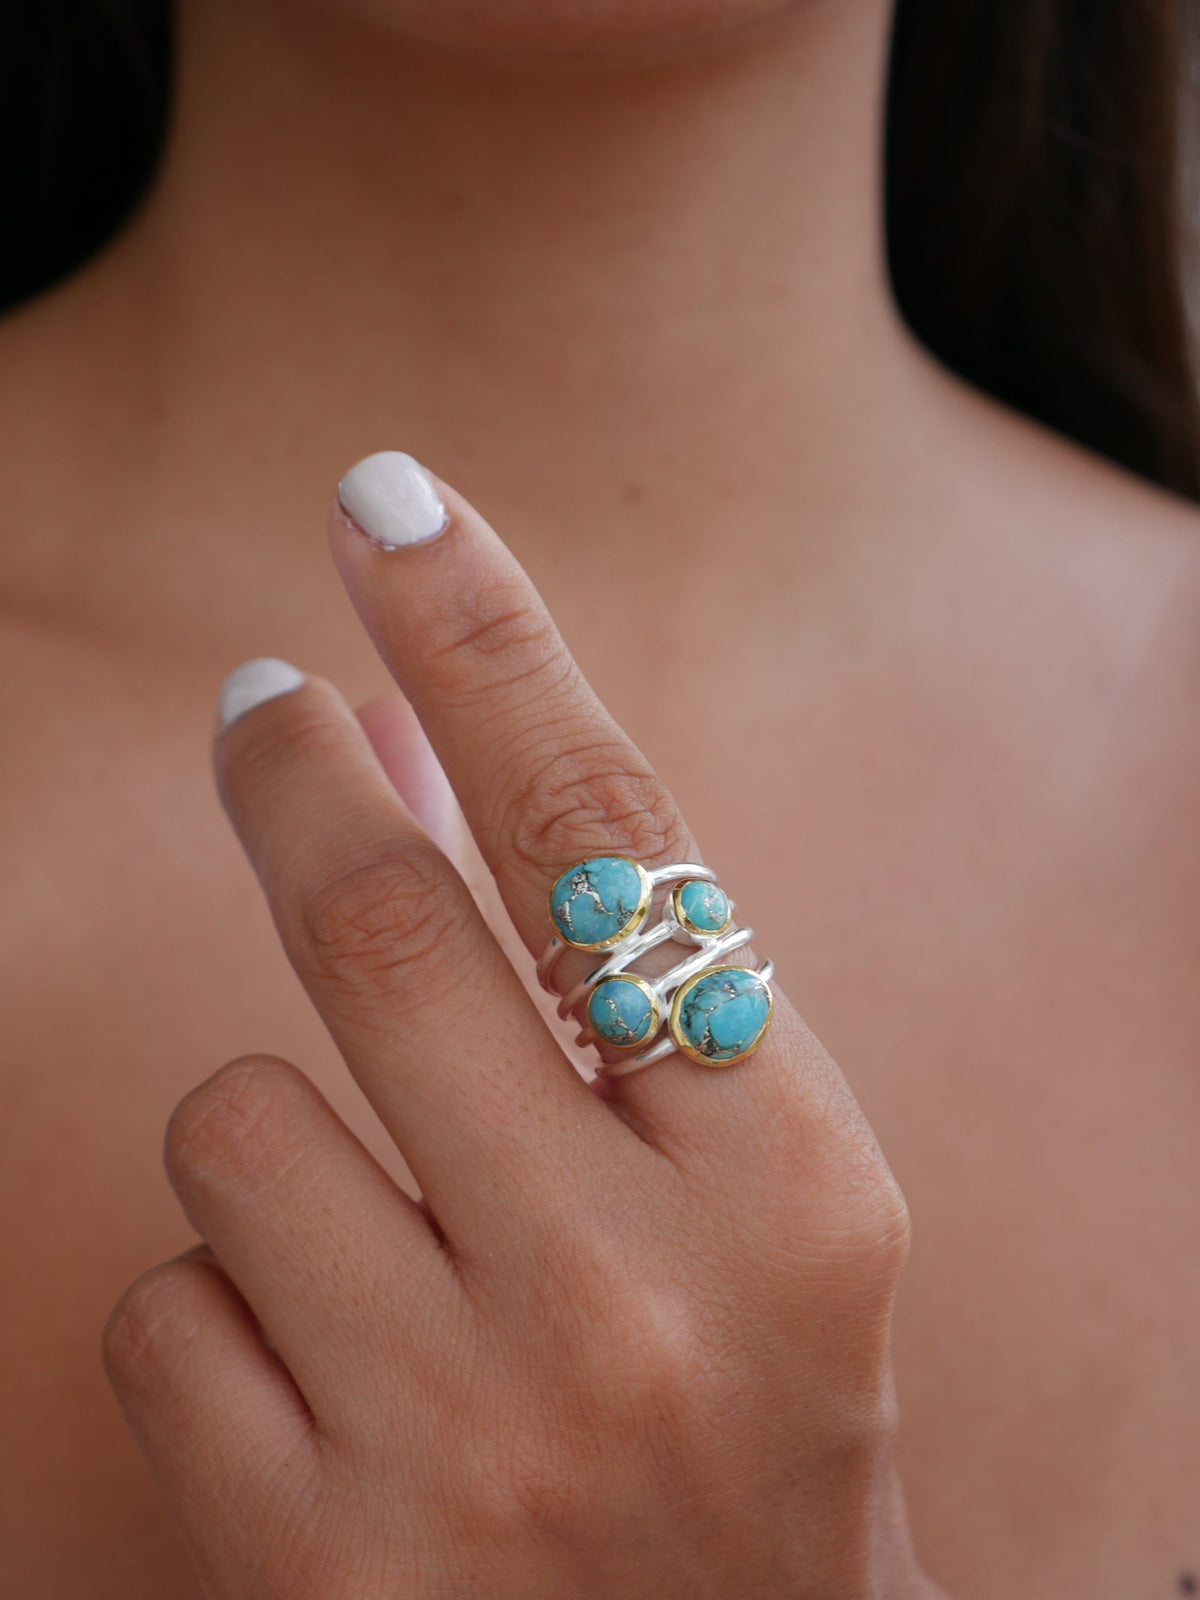 silver rings, ring, turquoise rings, 925, natural stone rings, cool rings, casual jewelry, dainty rings, designer jewelry, fine jewelry, accessories, new jewelry, new rings, trending on tiktok and instagram, gift ideas, turquoise jewelry 